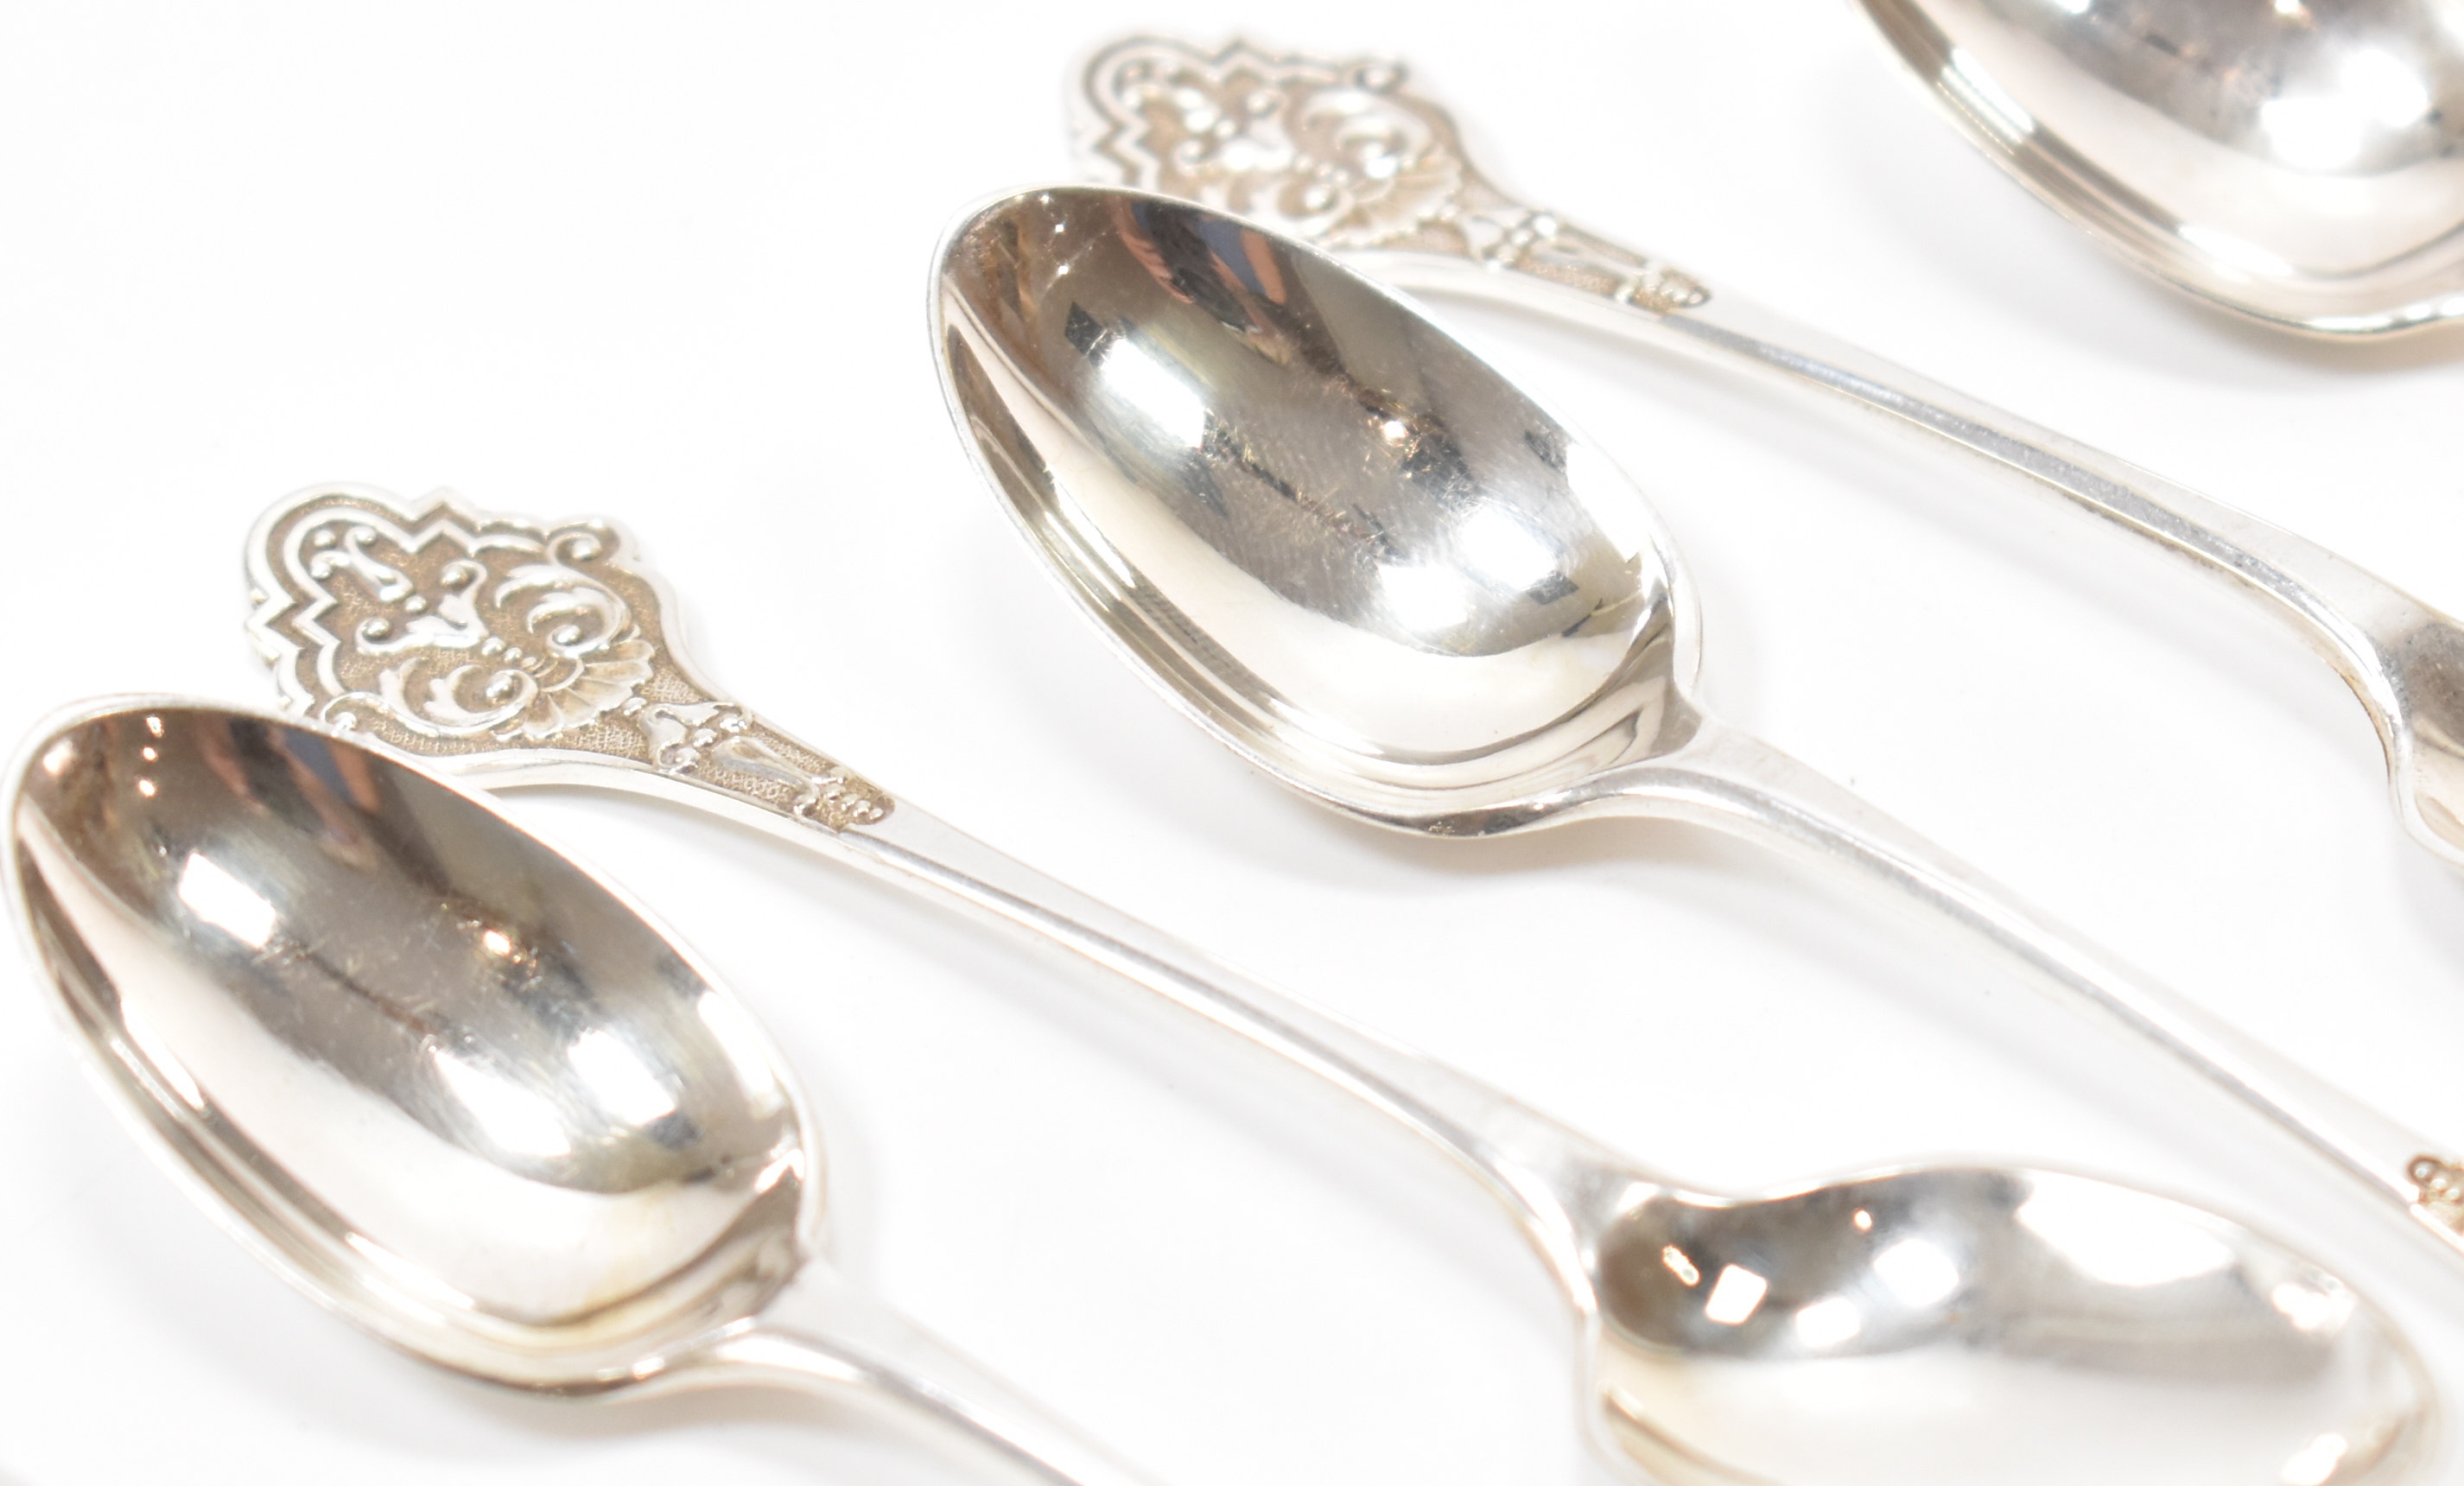 SIX VICTORIAN THOMAS PRIME SILVER PLATED TEA SPOONS - Image 3 of 5